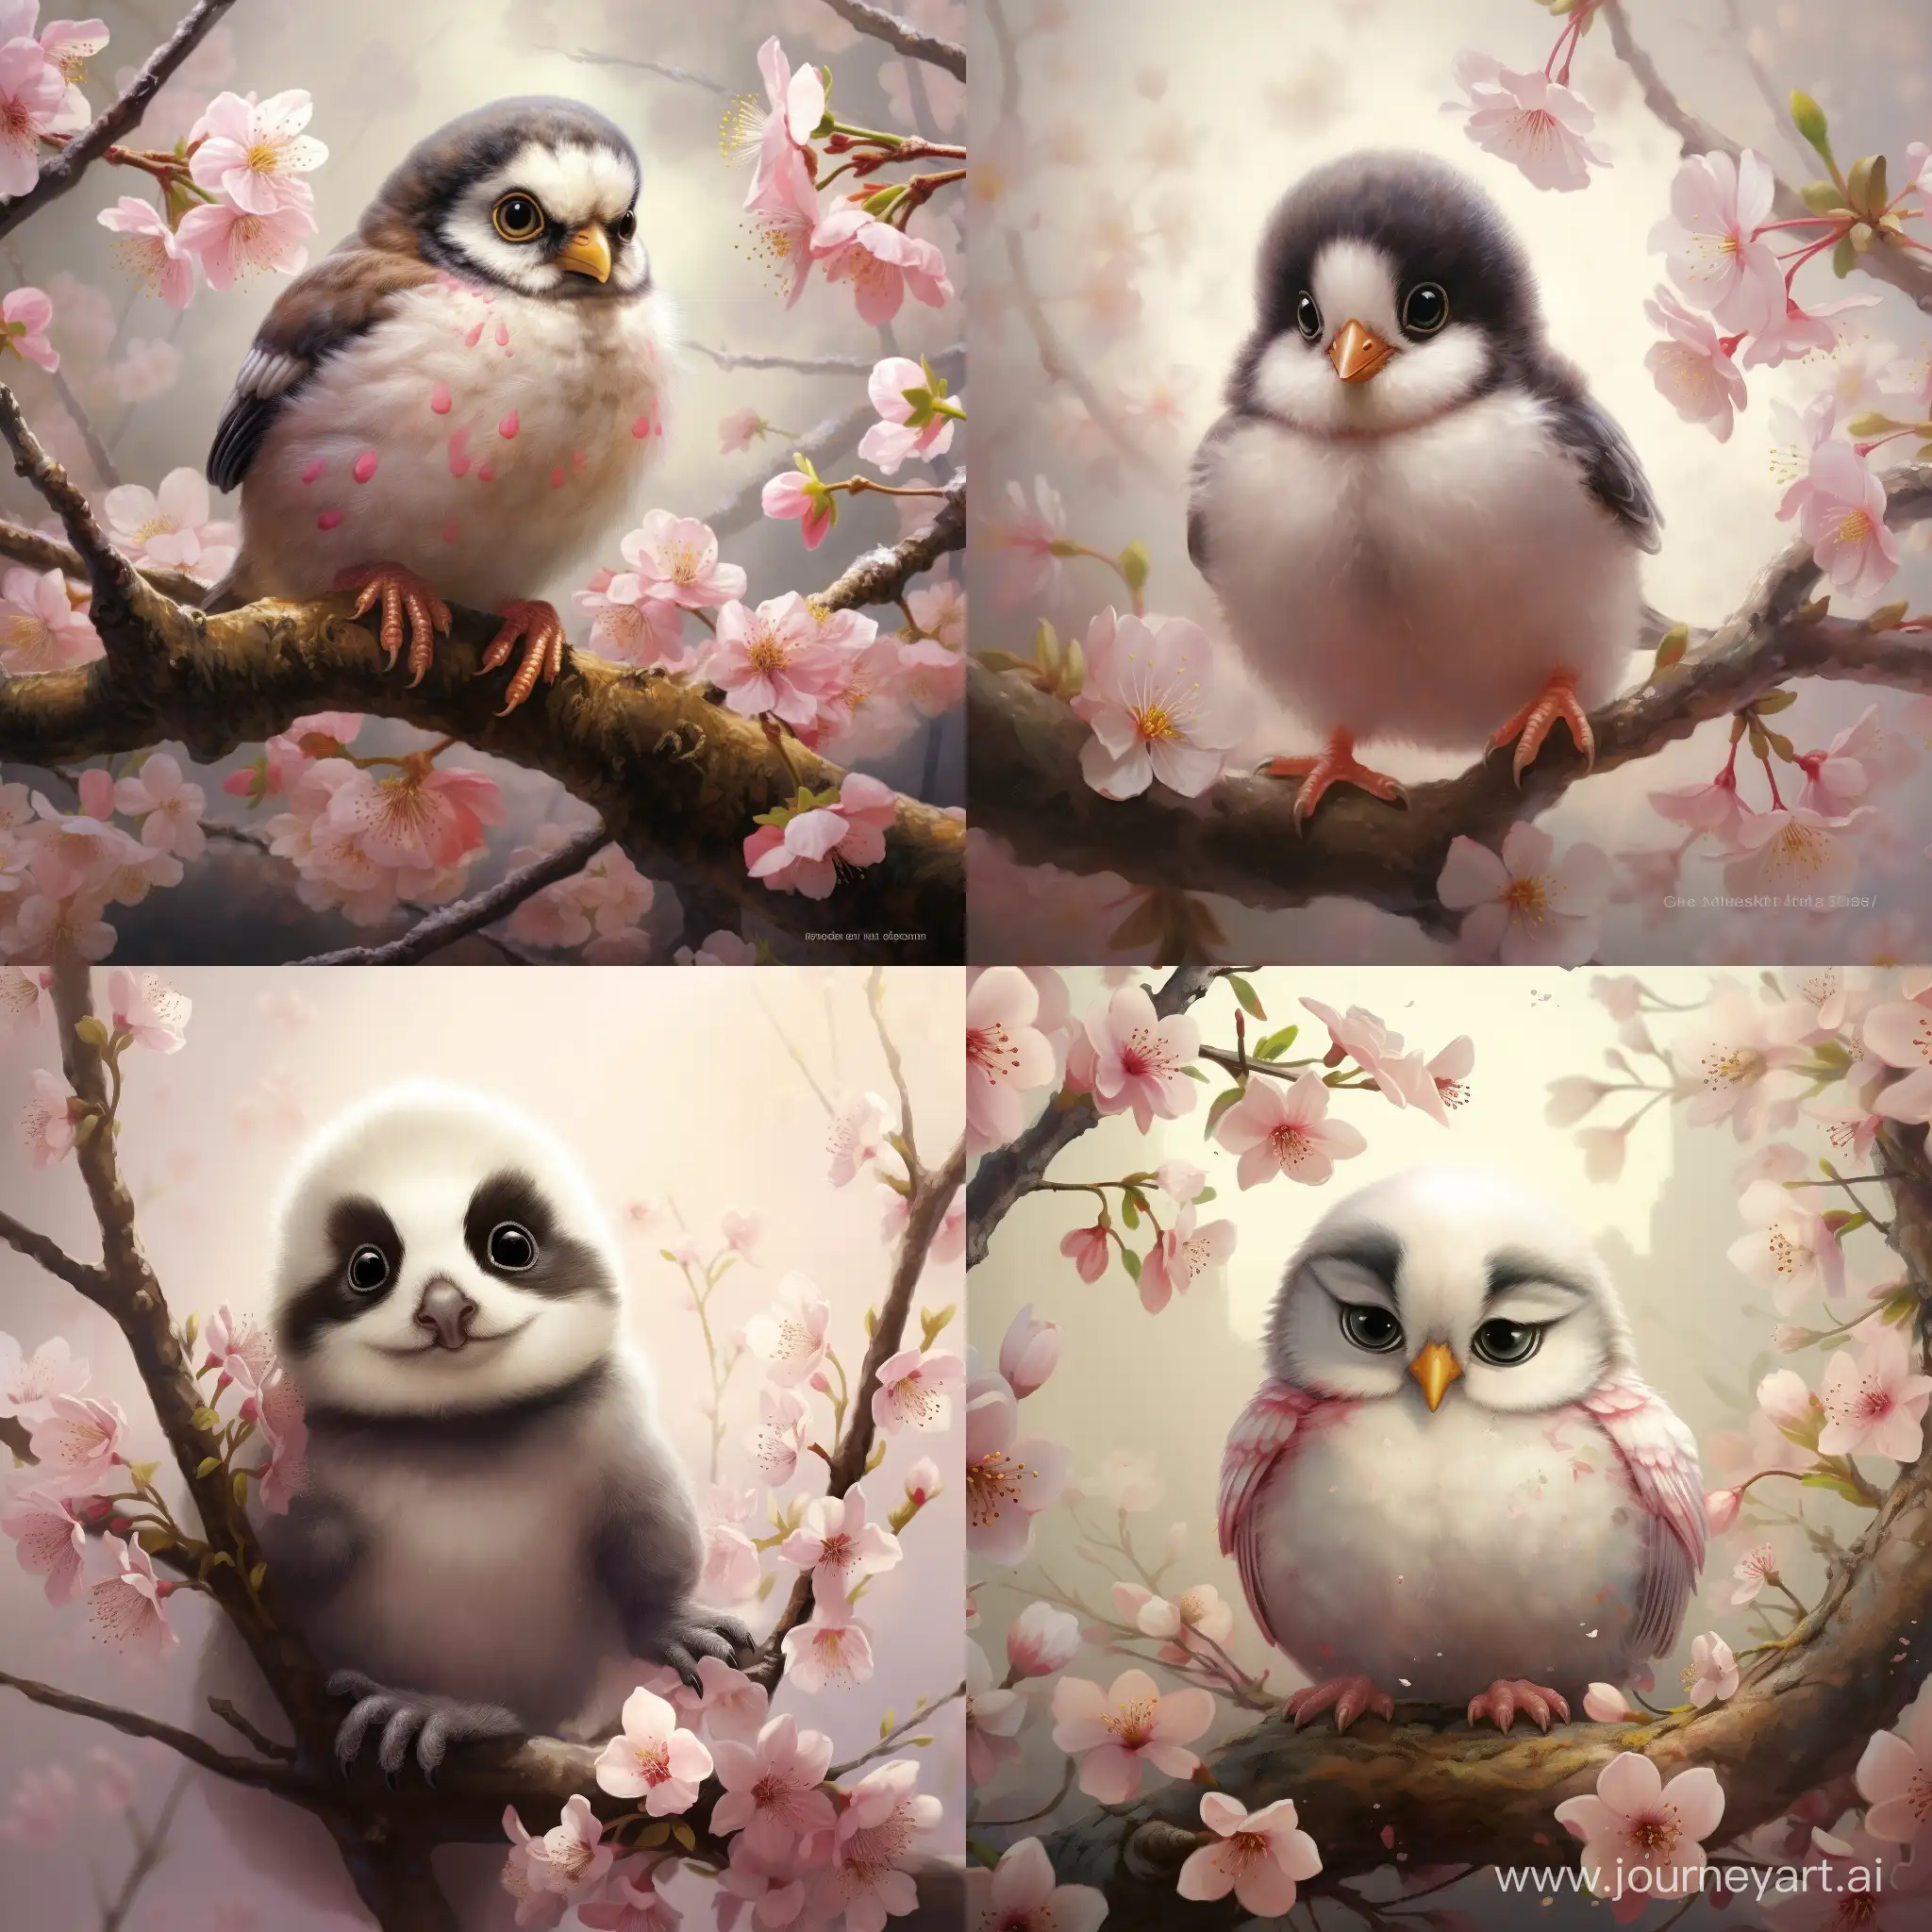 The cute and fluffy baby penguin is studying in the background of the Peach Blossom Spring, keeping a low profile and biding its time."